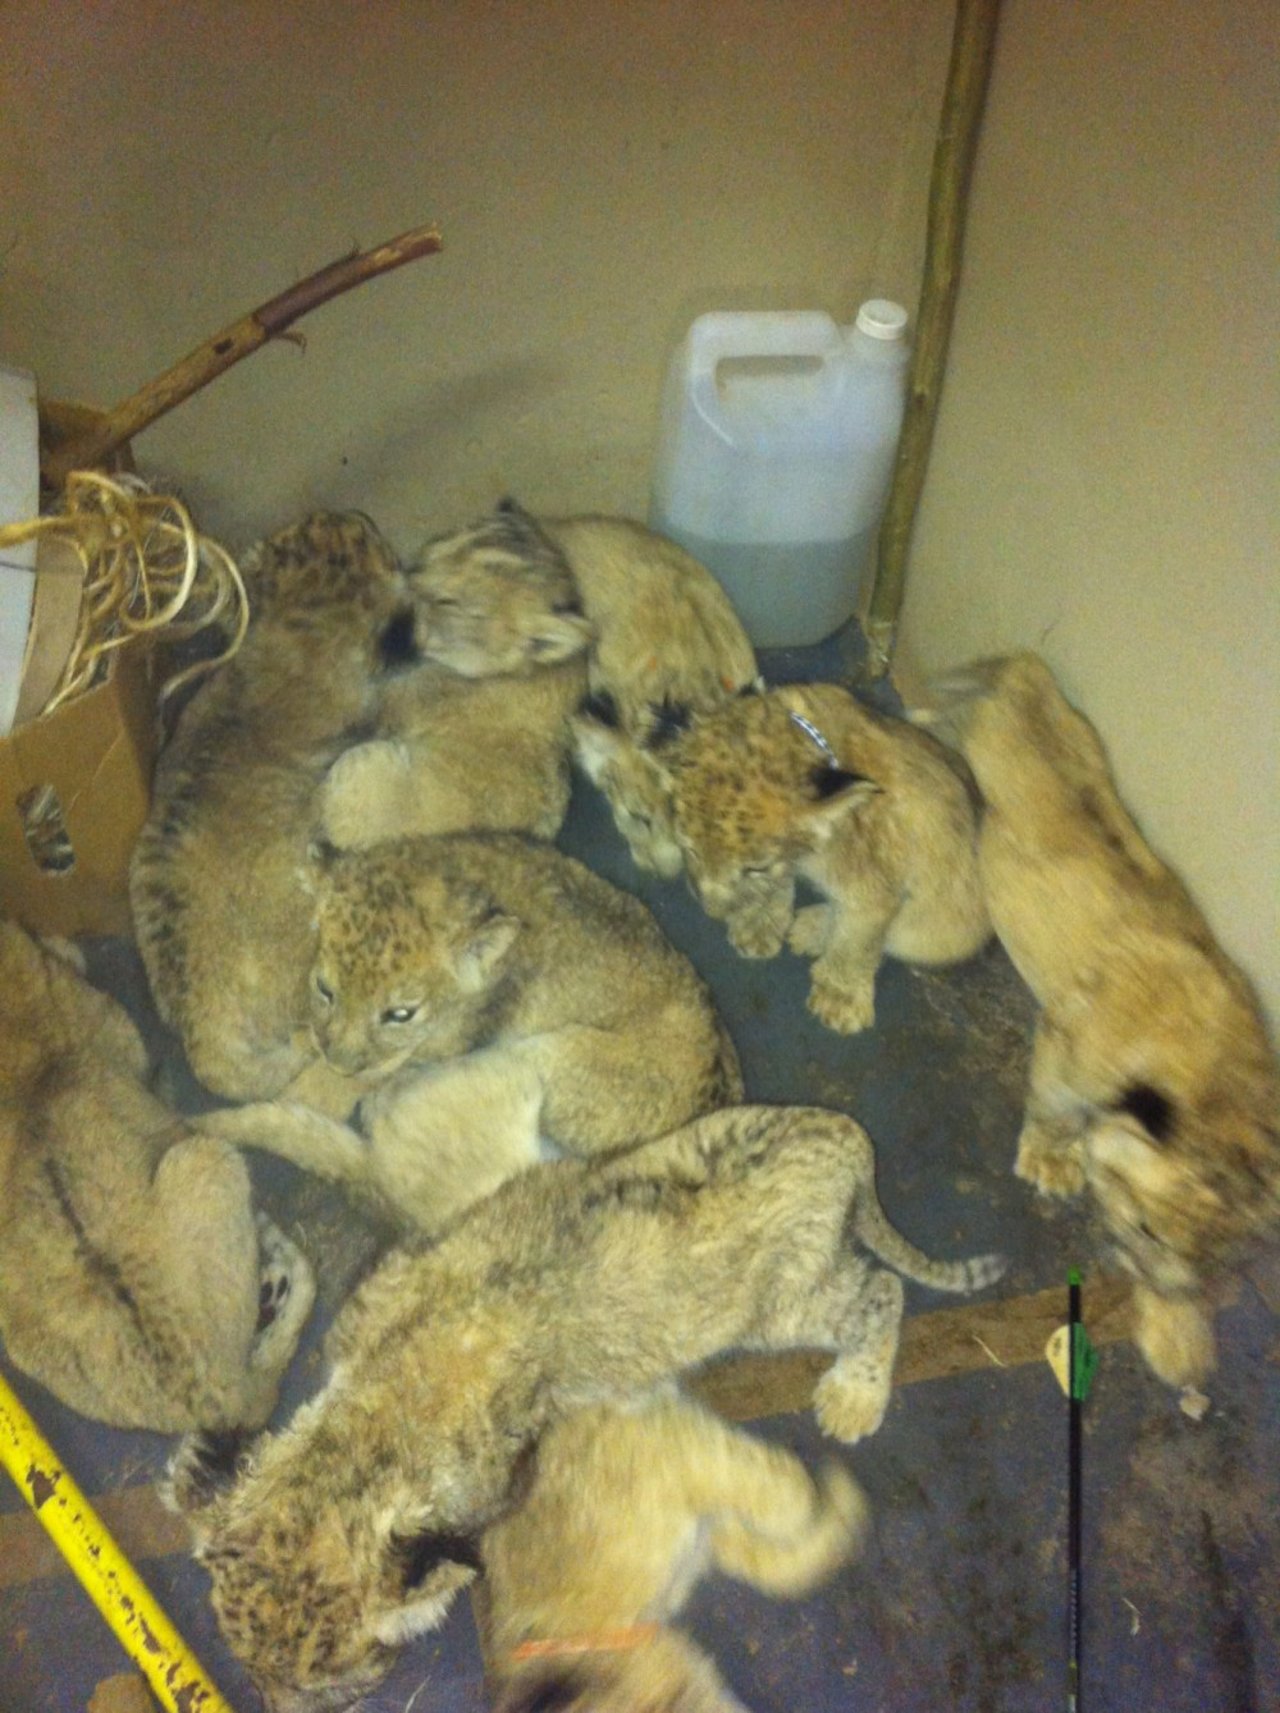 Lion cubs in a cramped cage - image by Blood Lions